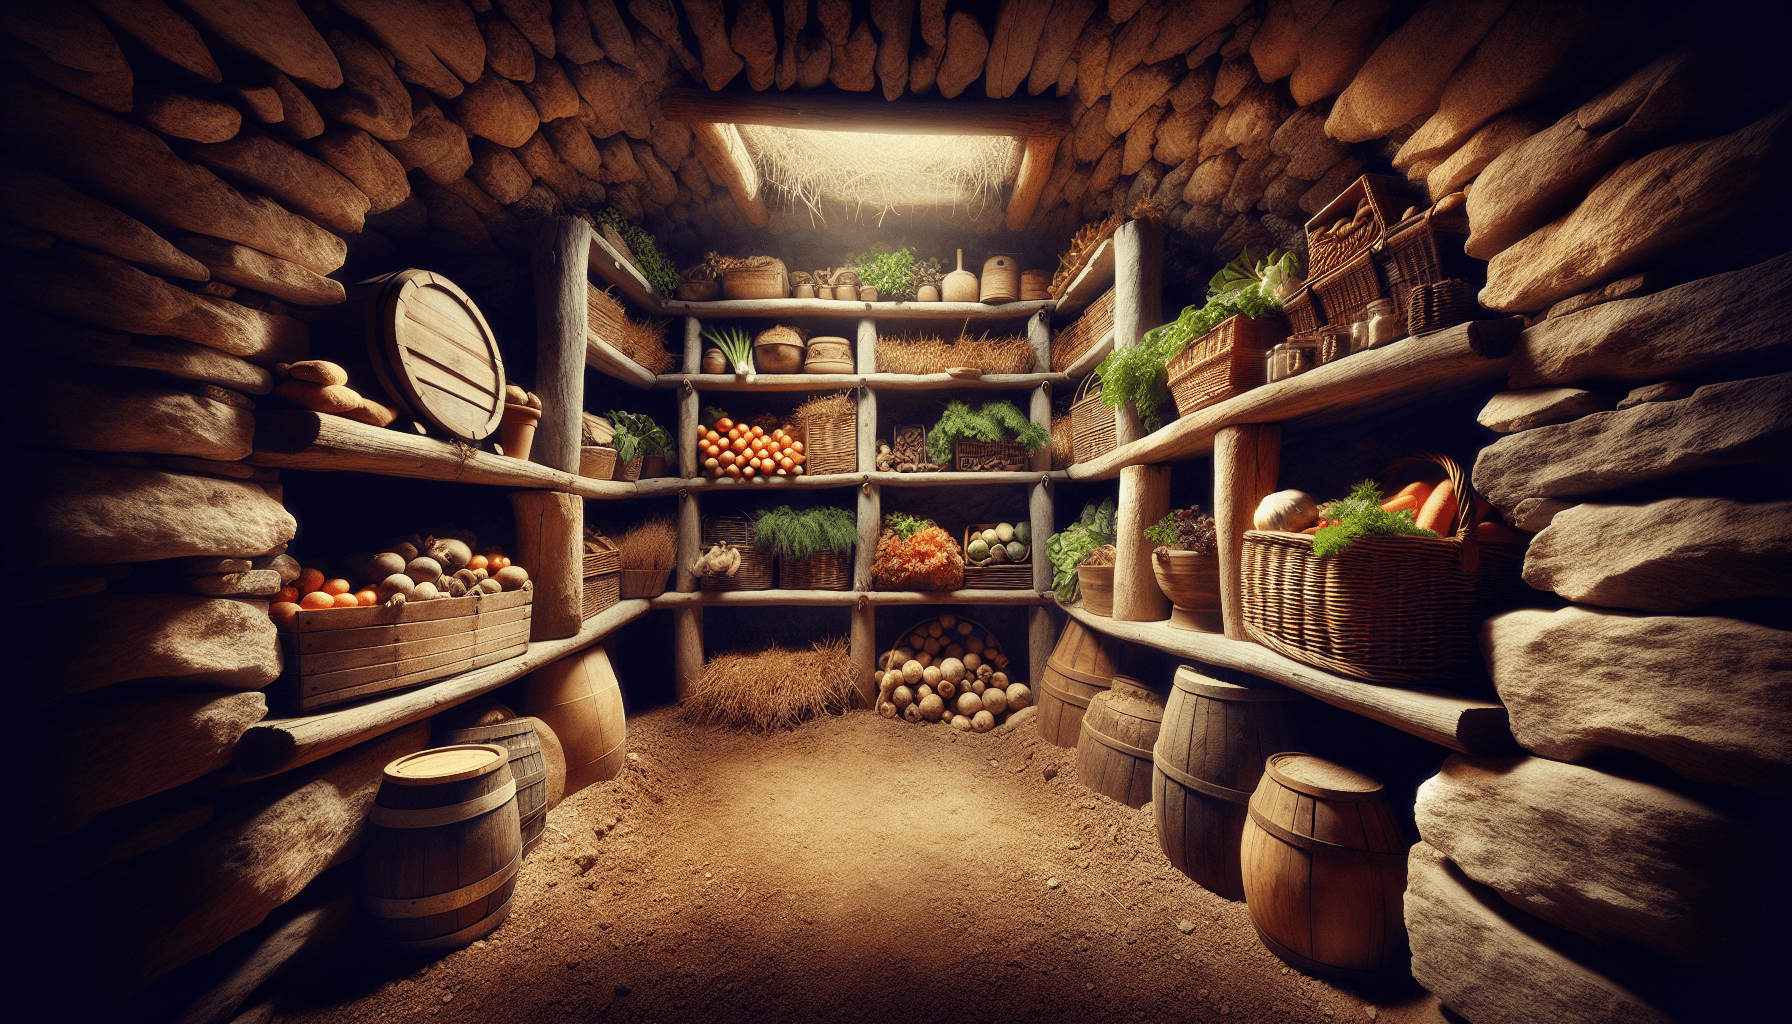 What Are The Key Considerations For Building An Underground Root Cellar?